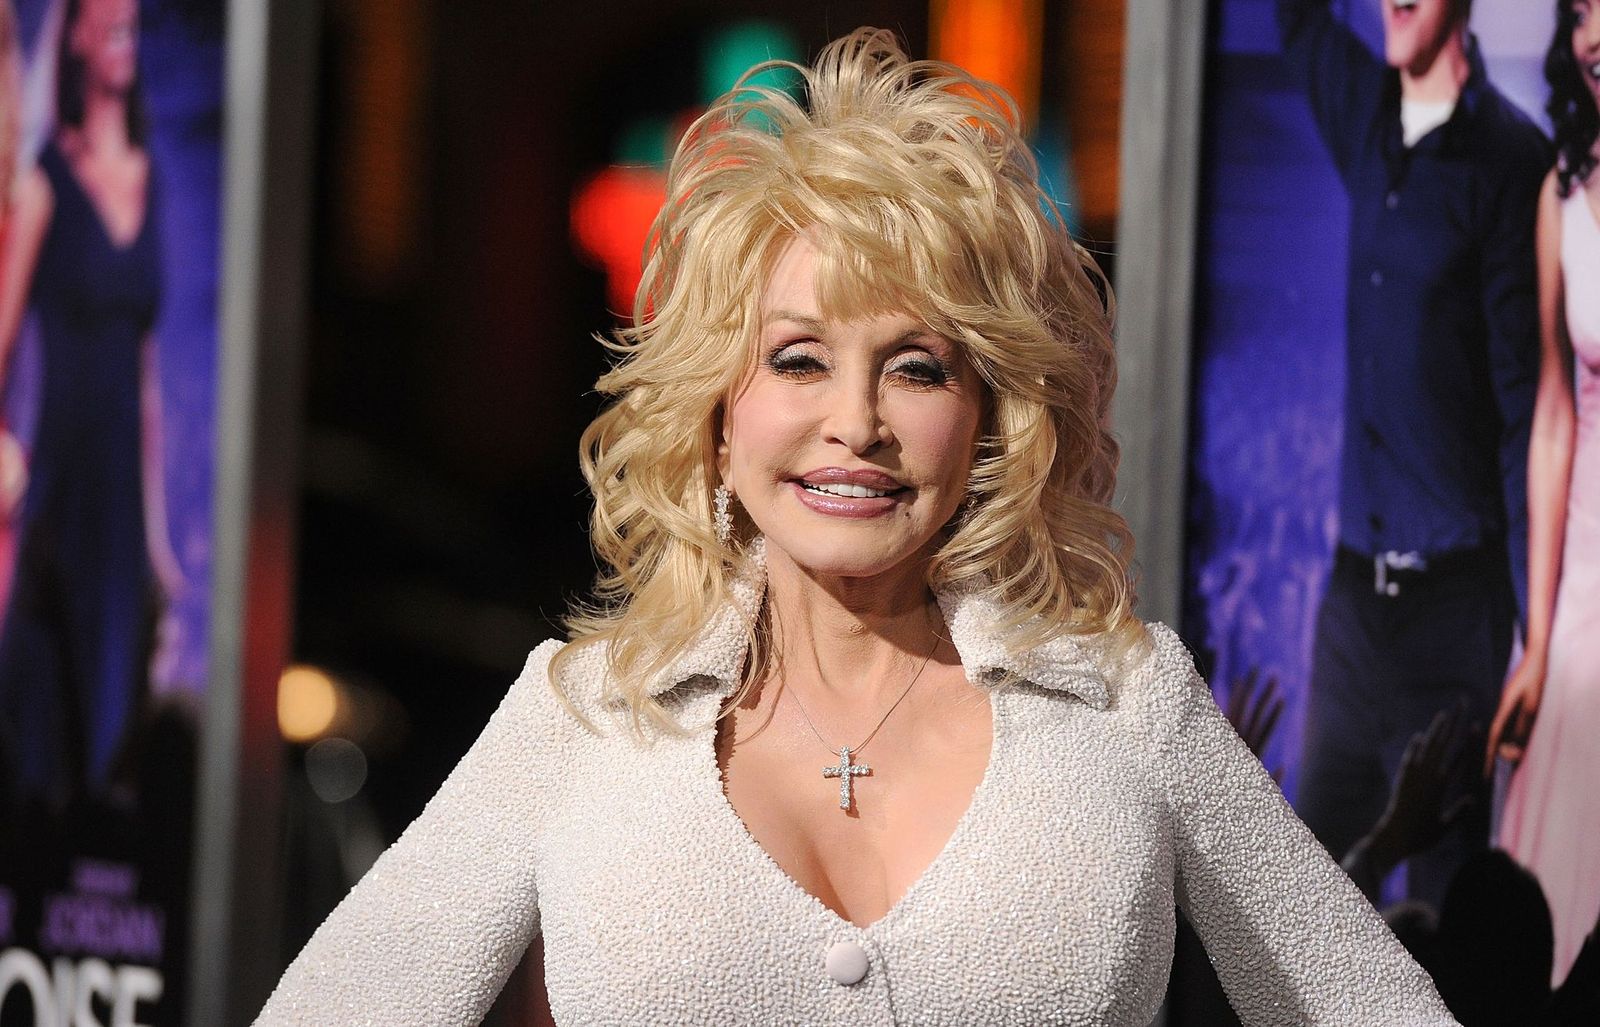 Dolly Parton at the premiere of Warner Bros. Pictures' "Joyful Noise" held at Grauman's Chinese Theatre on January 9, 2012 in Hollywood, California | Photo: Getty Images